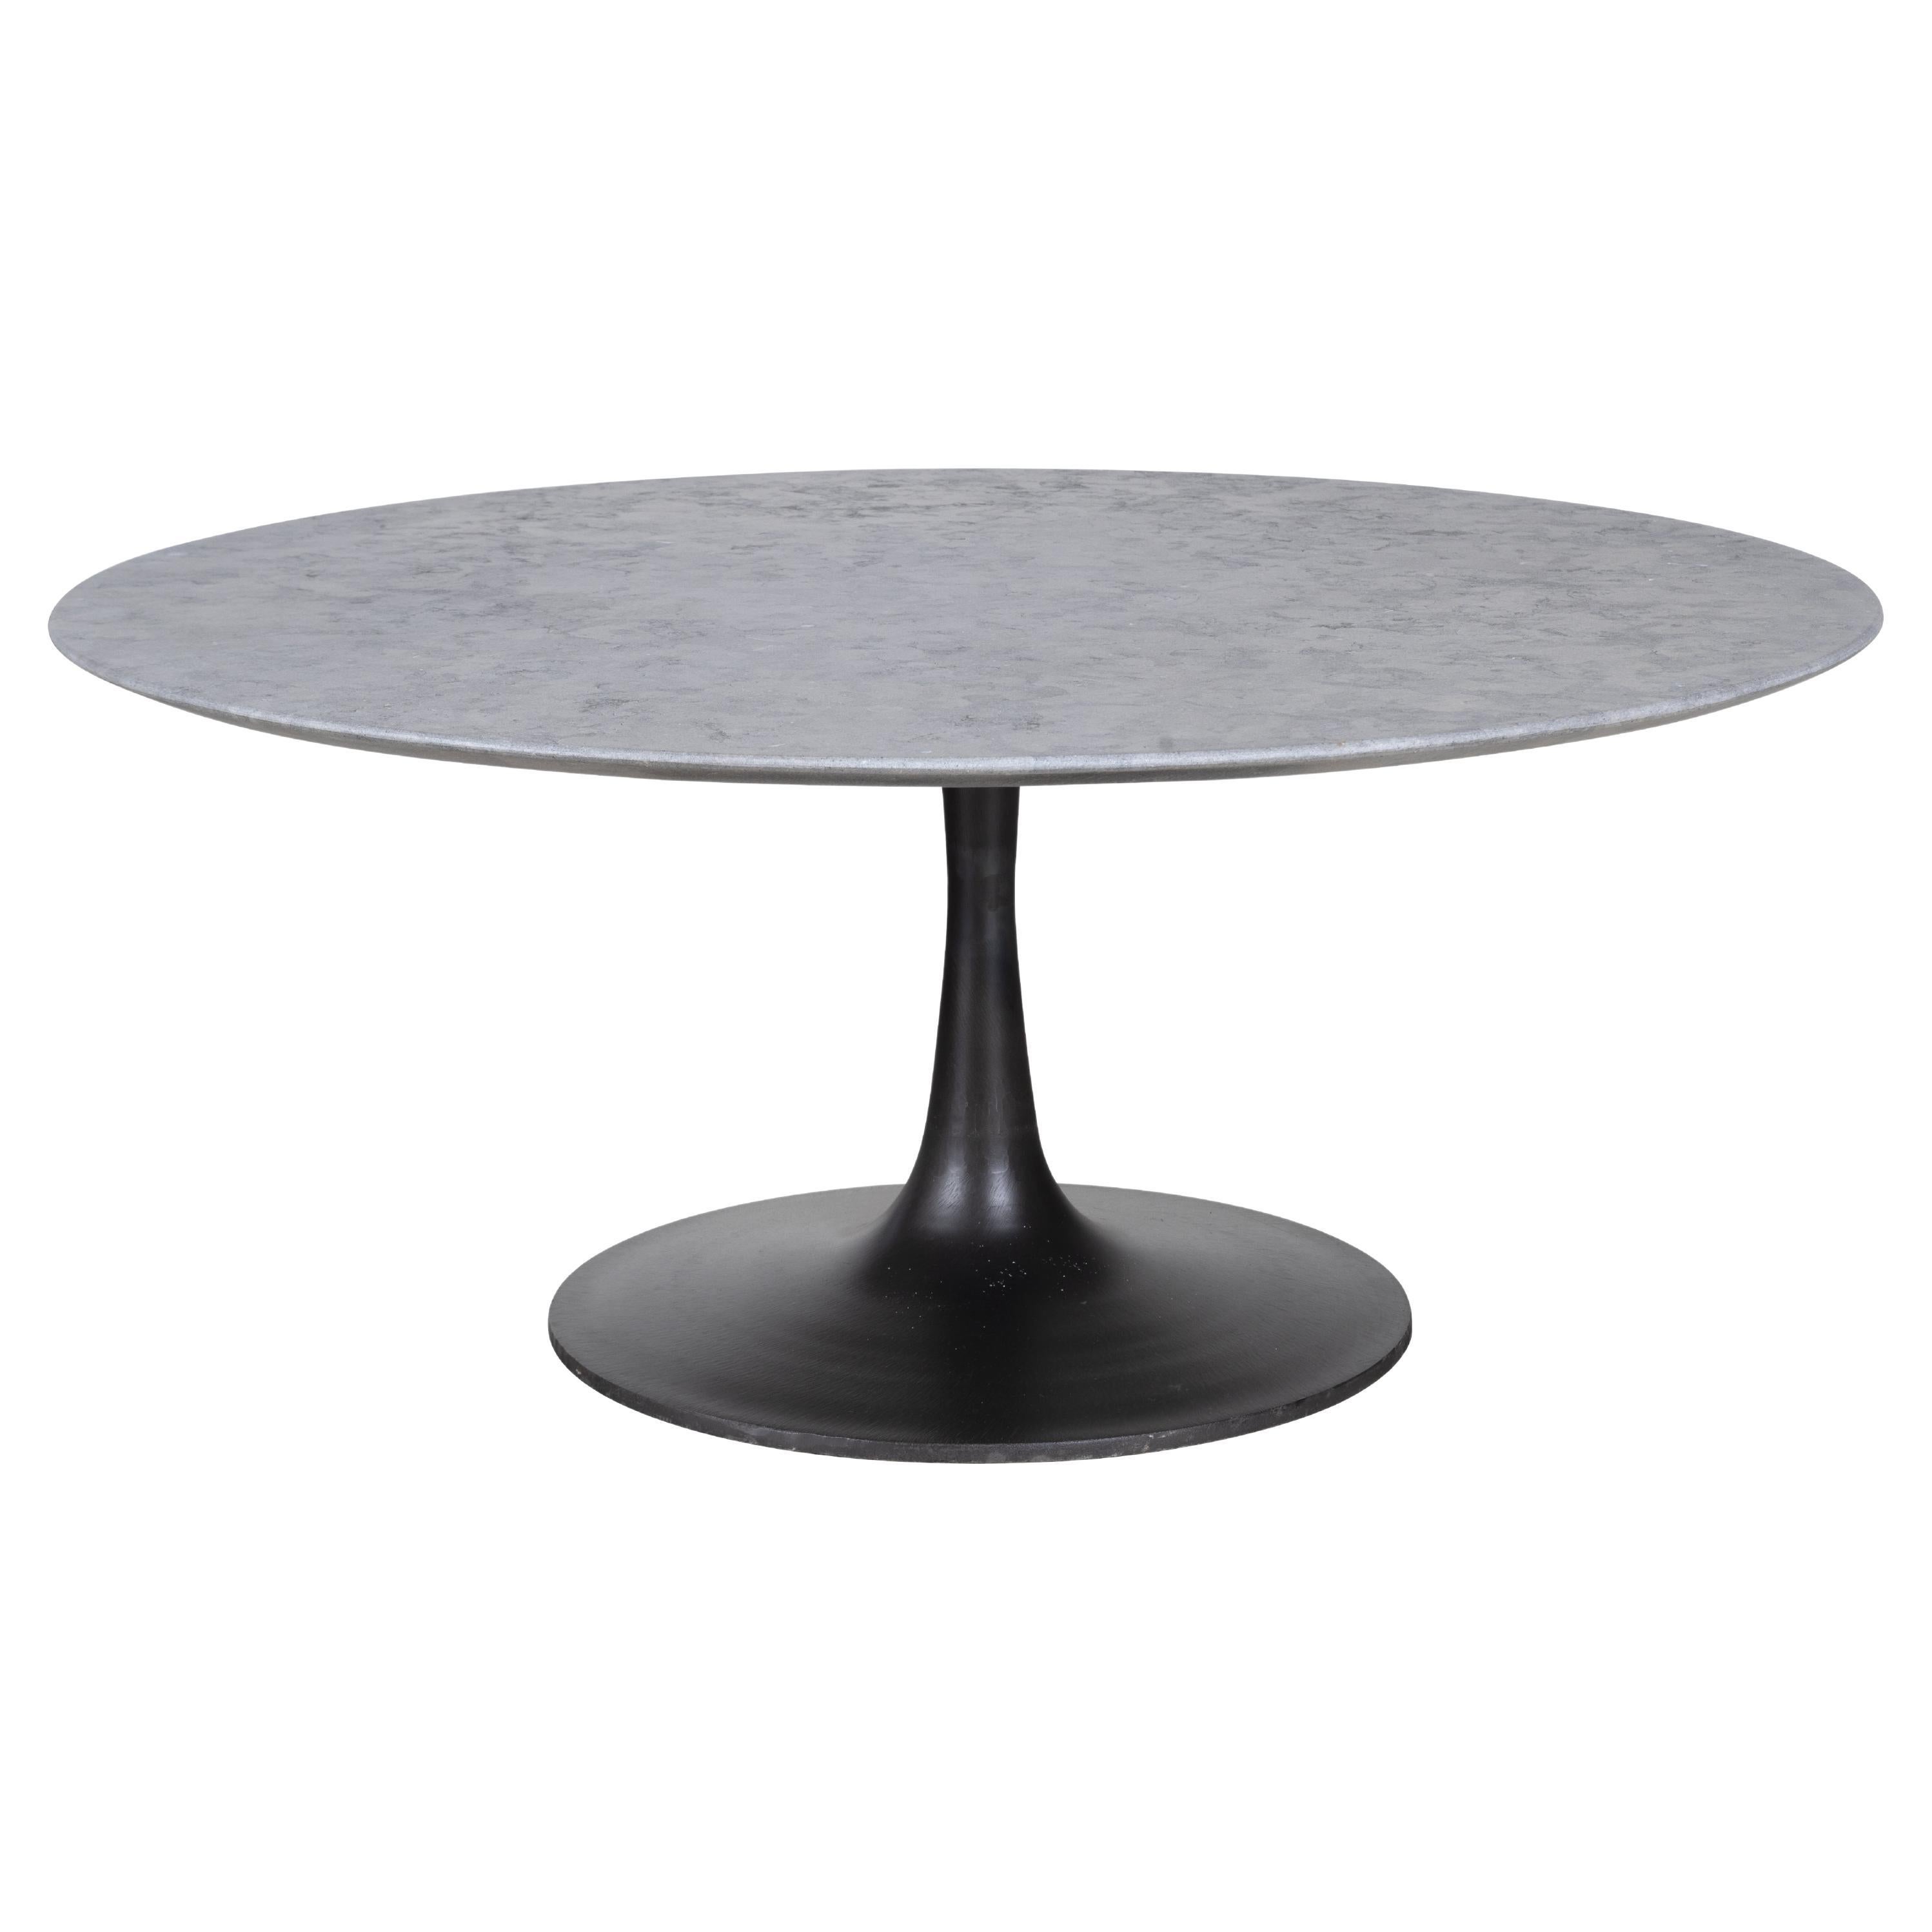 Short Tulip Base with Rocas Azul Top Coffee Table For Sale